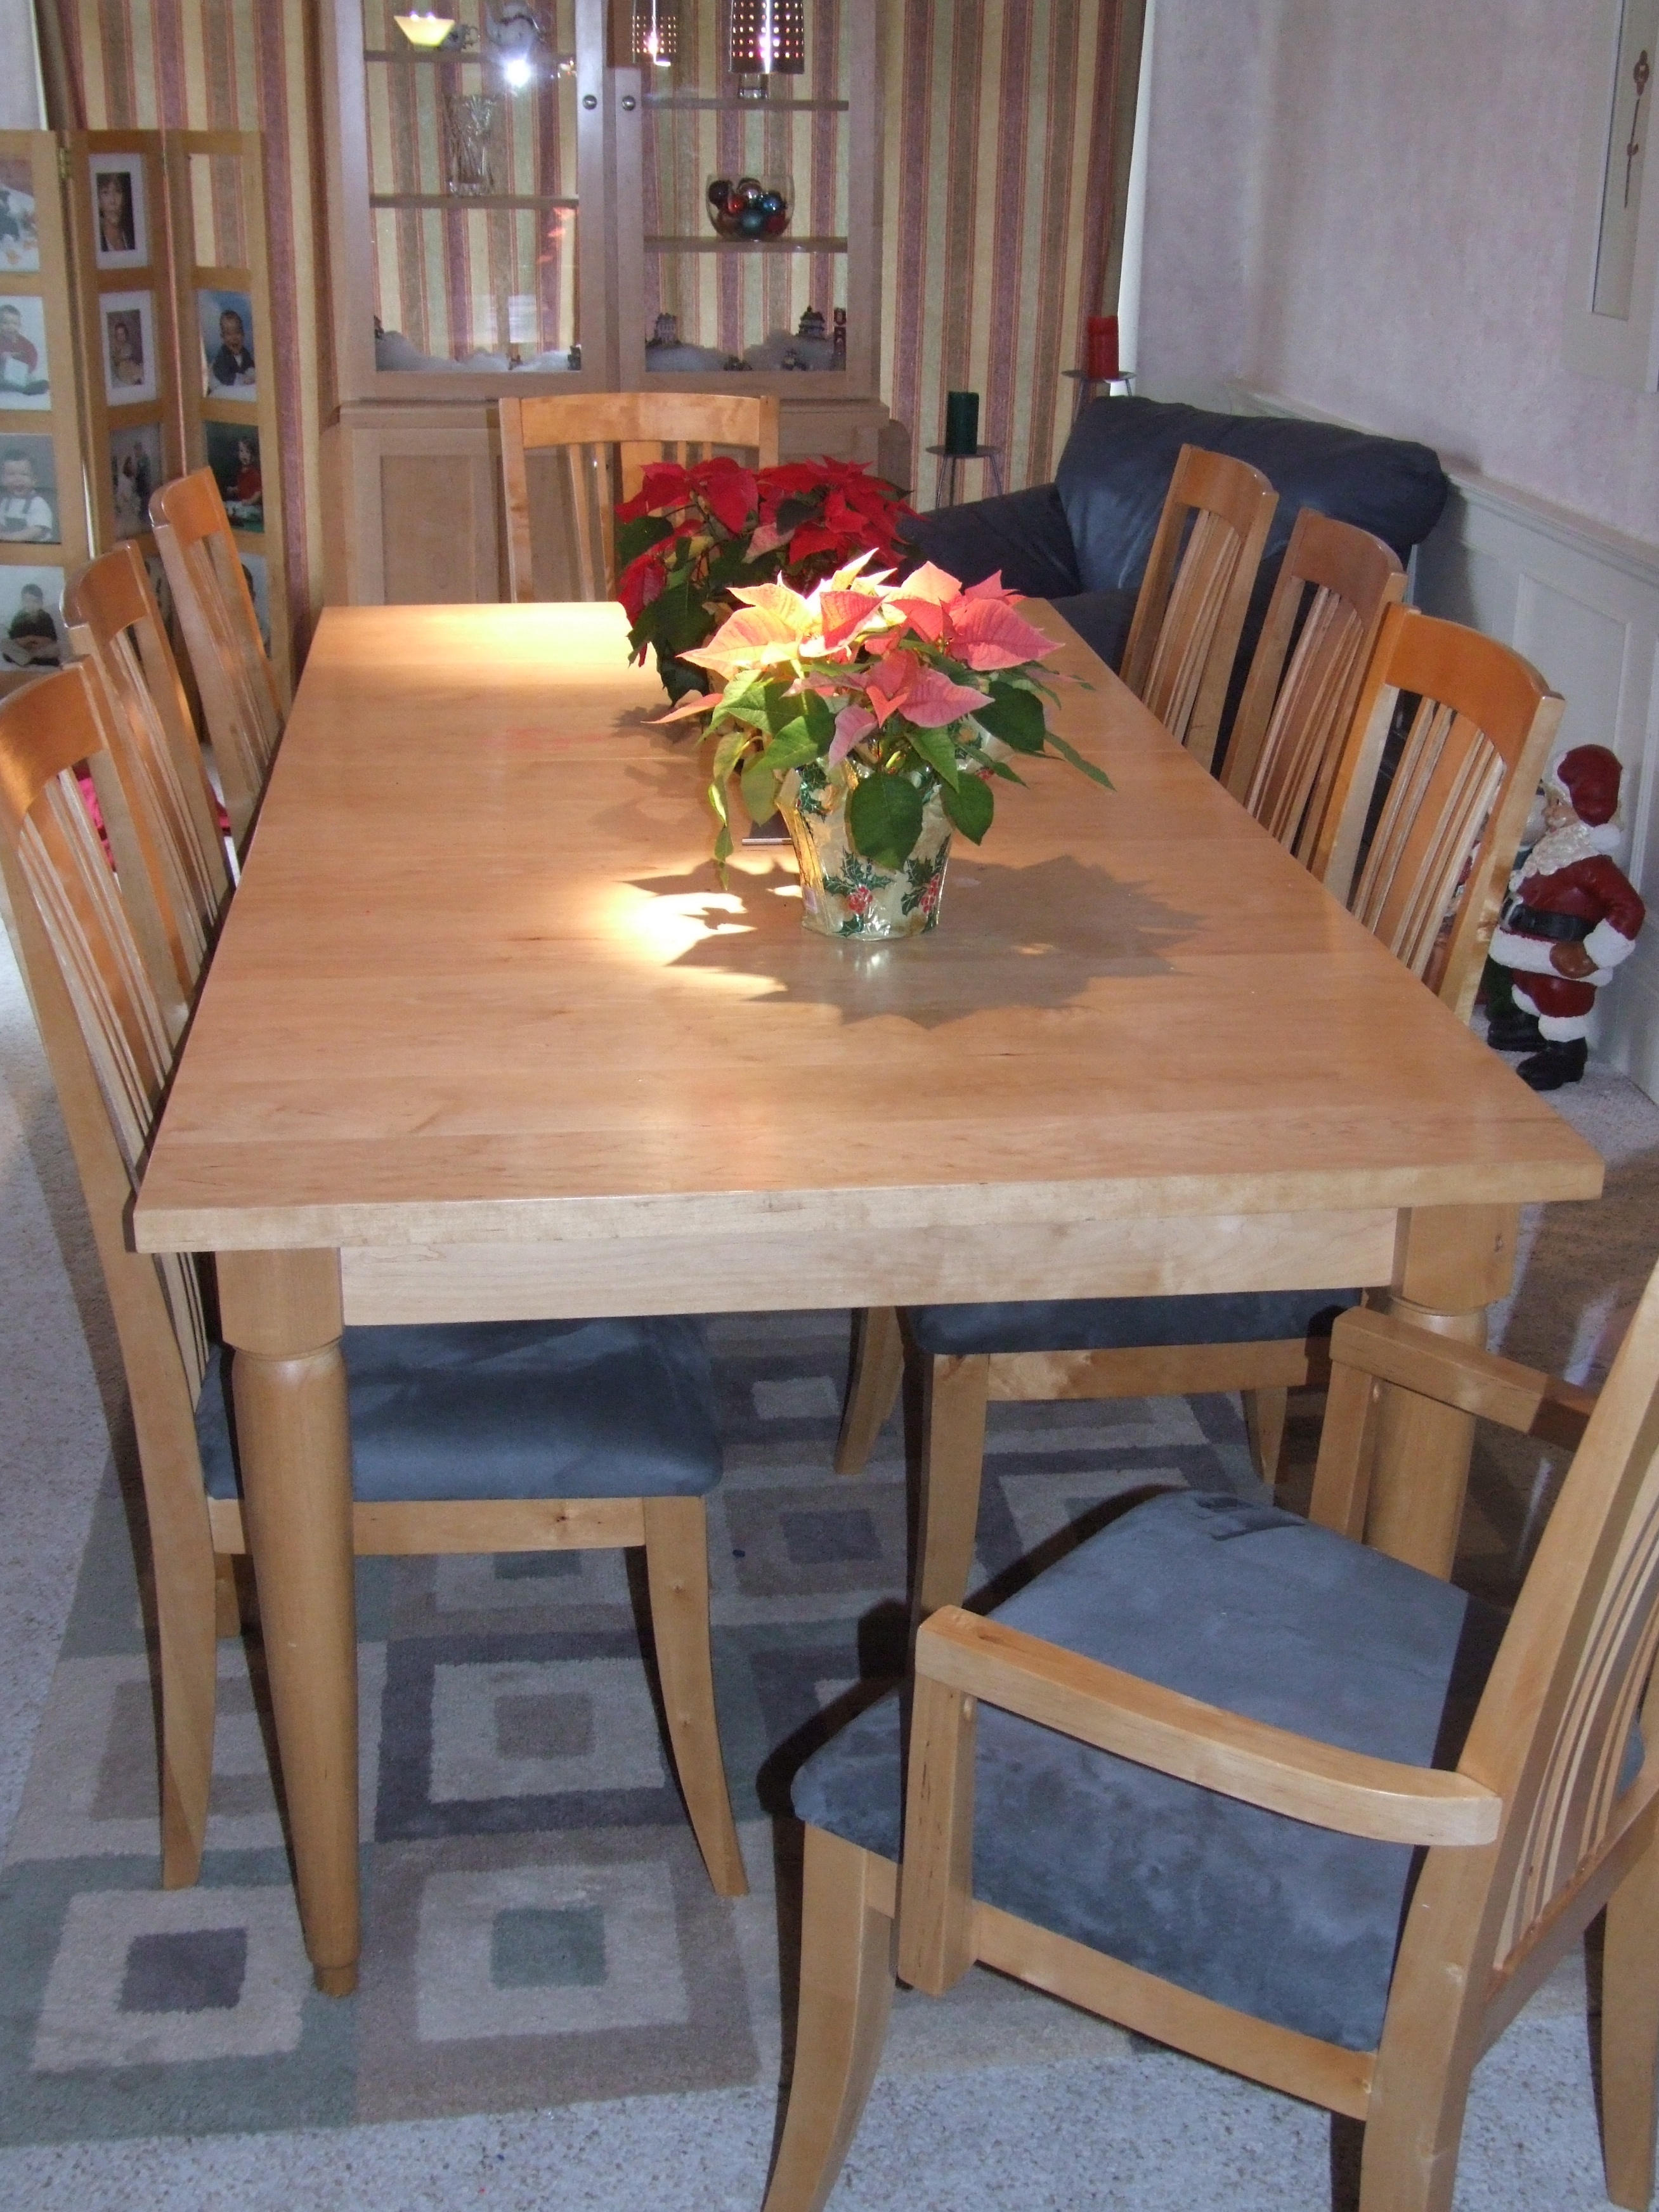 Diningroom Table -(not chairs)